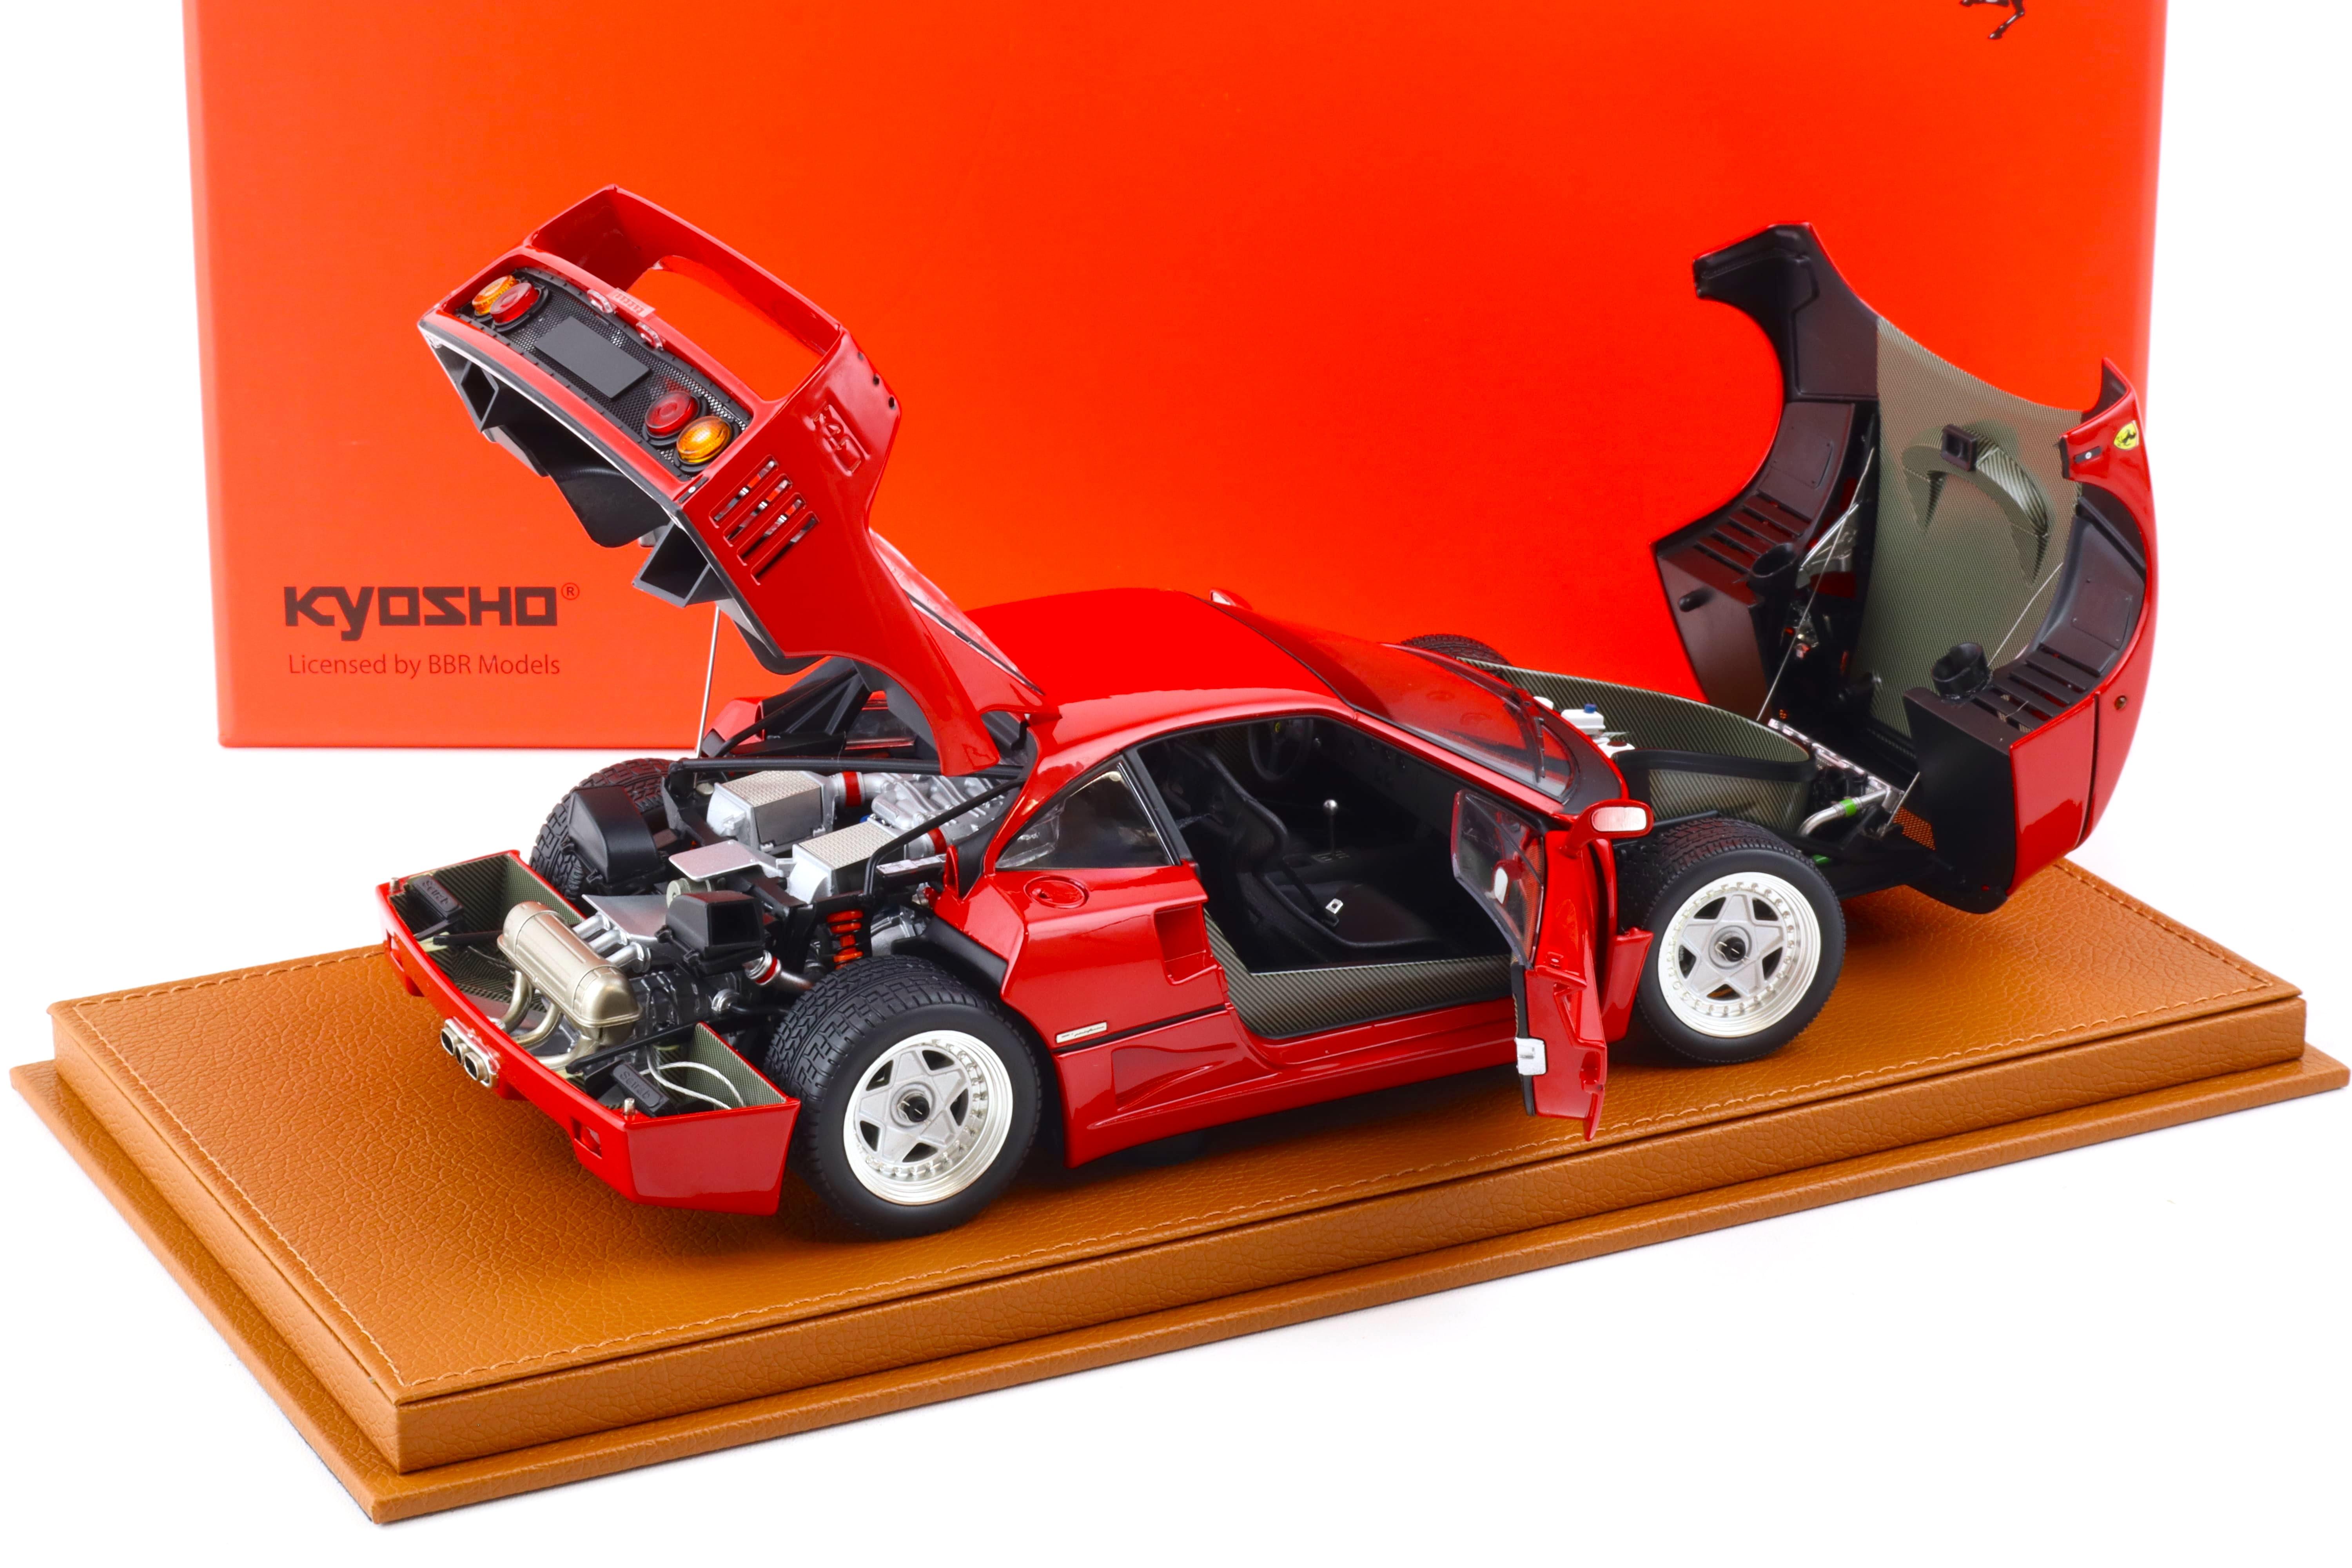 1:18 BBR Kyosho Ferrari F40 Valeo S/N red personal car Gianno Agnelli with Showcase - Limited 300 pcs.